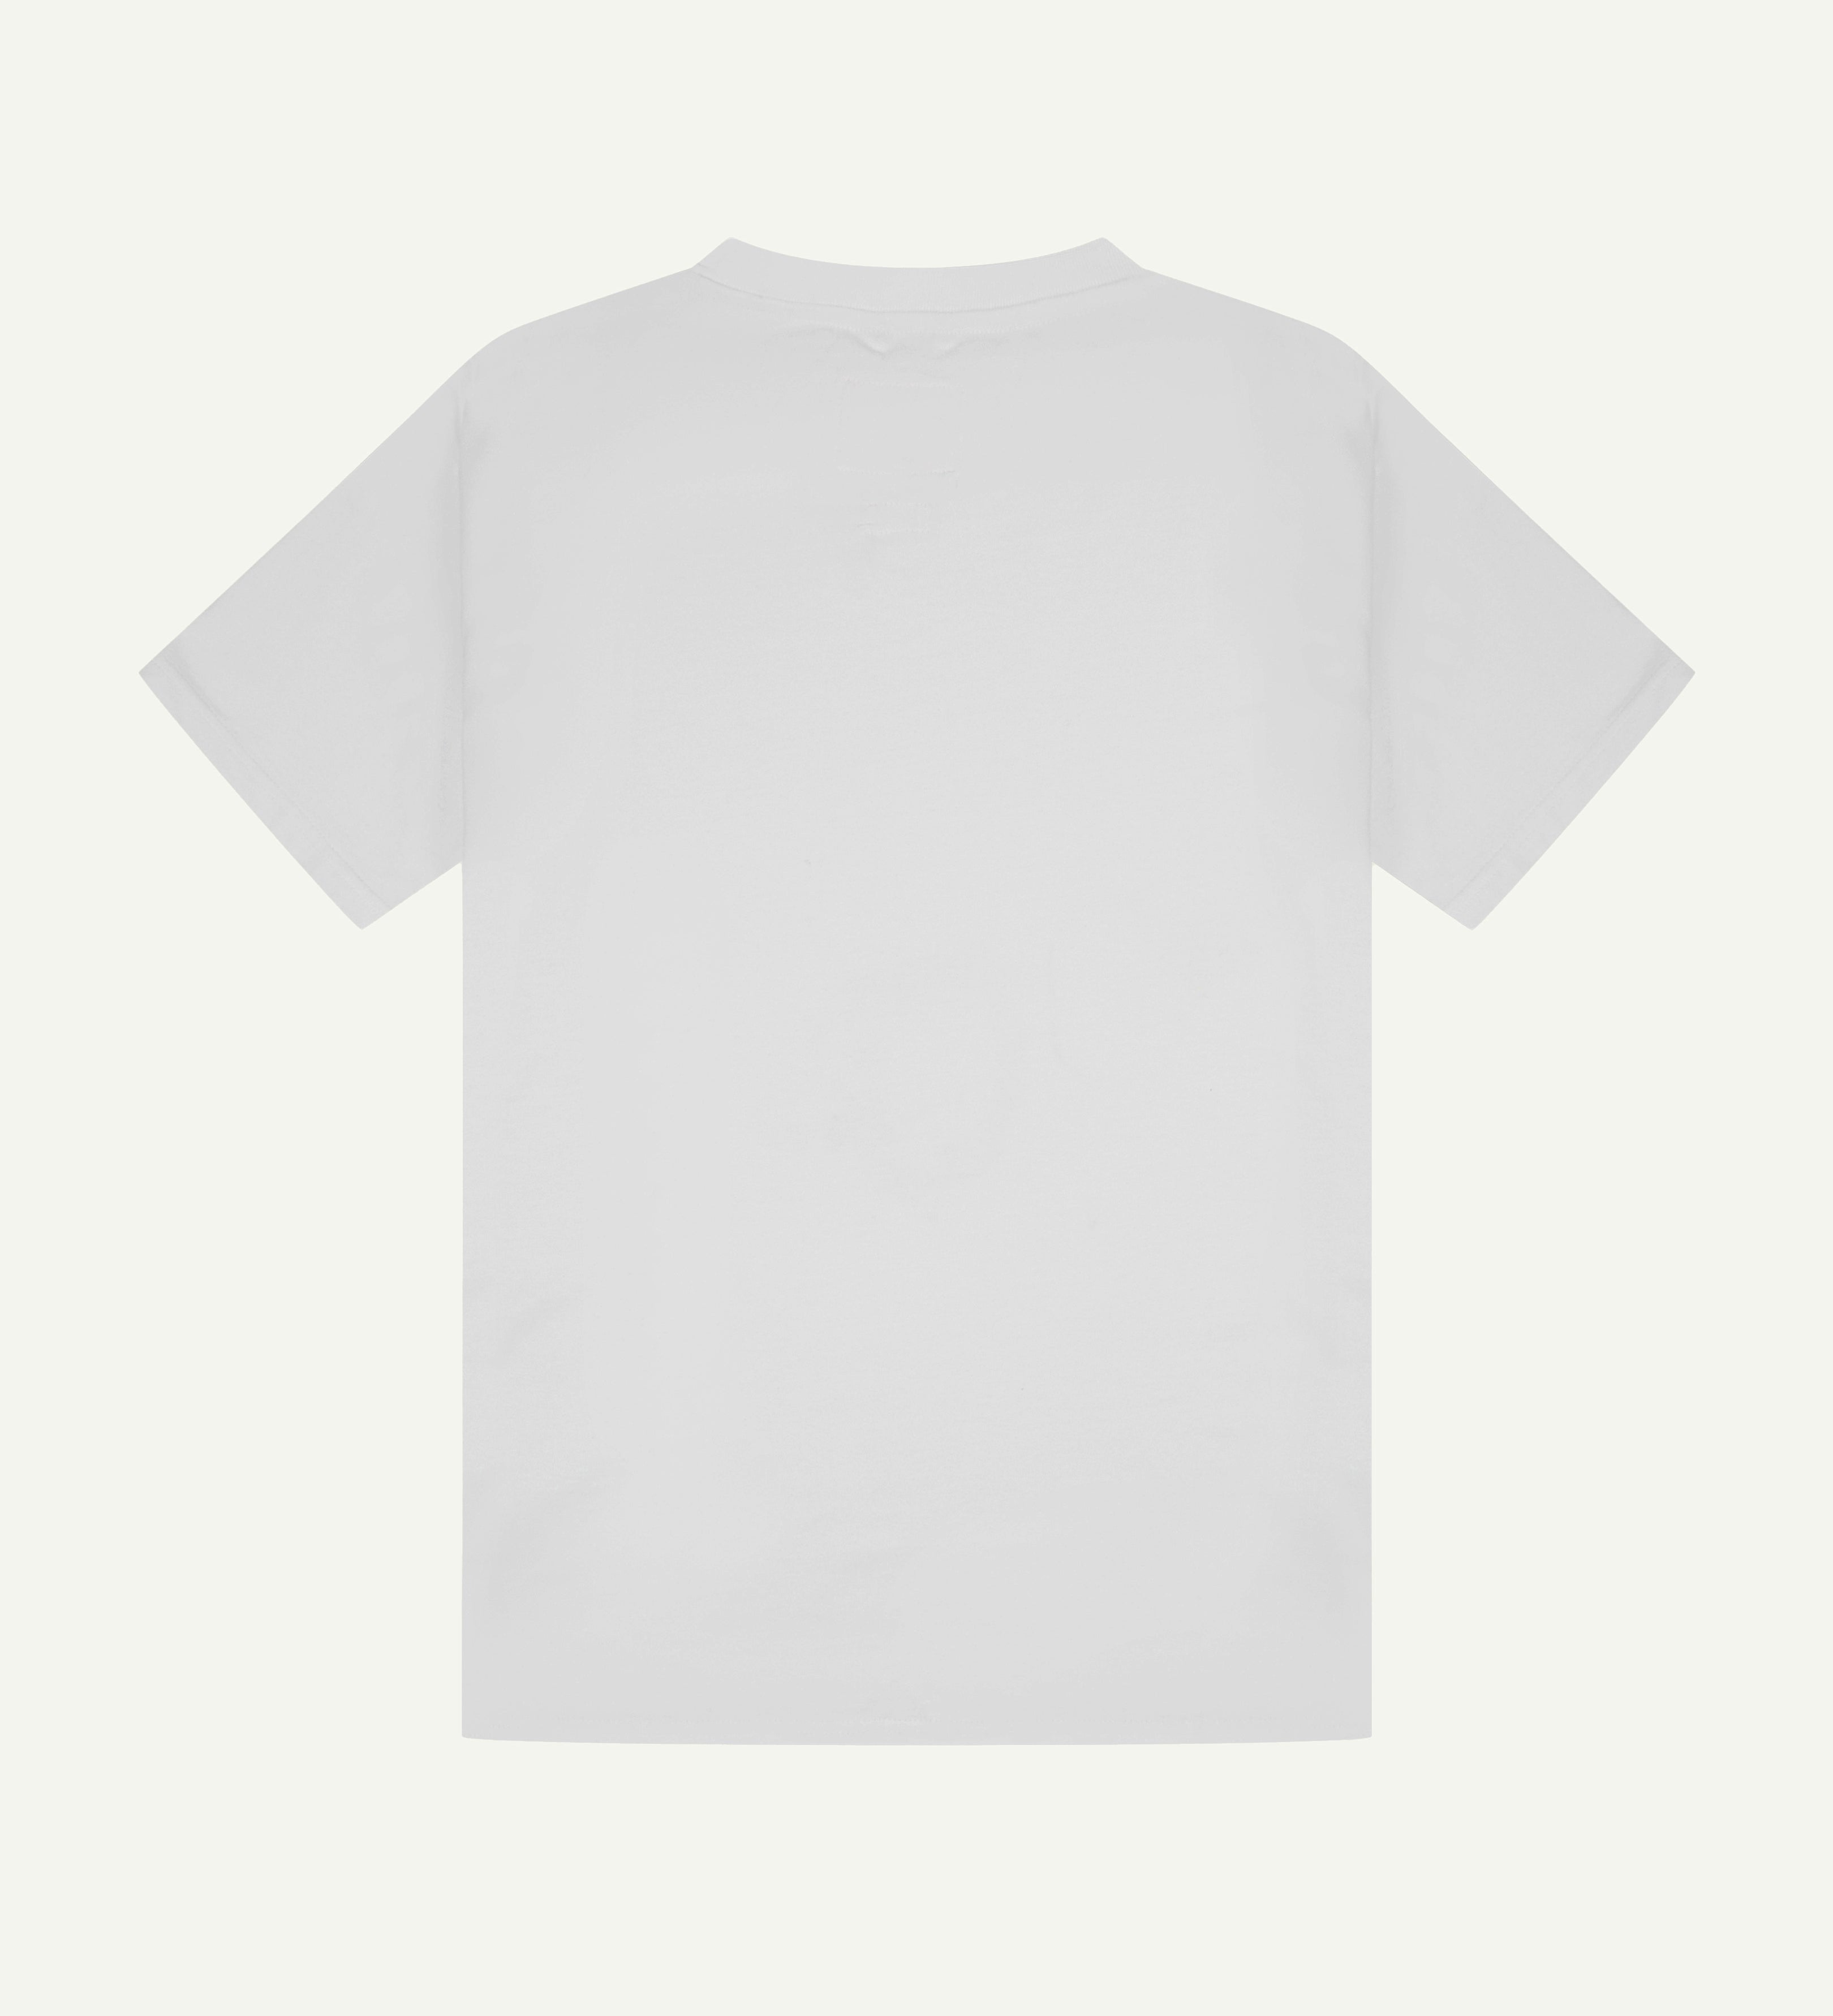 Back view of uskees #7006 men's short sleeve Tee in white